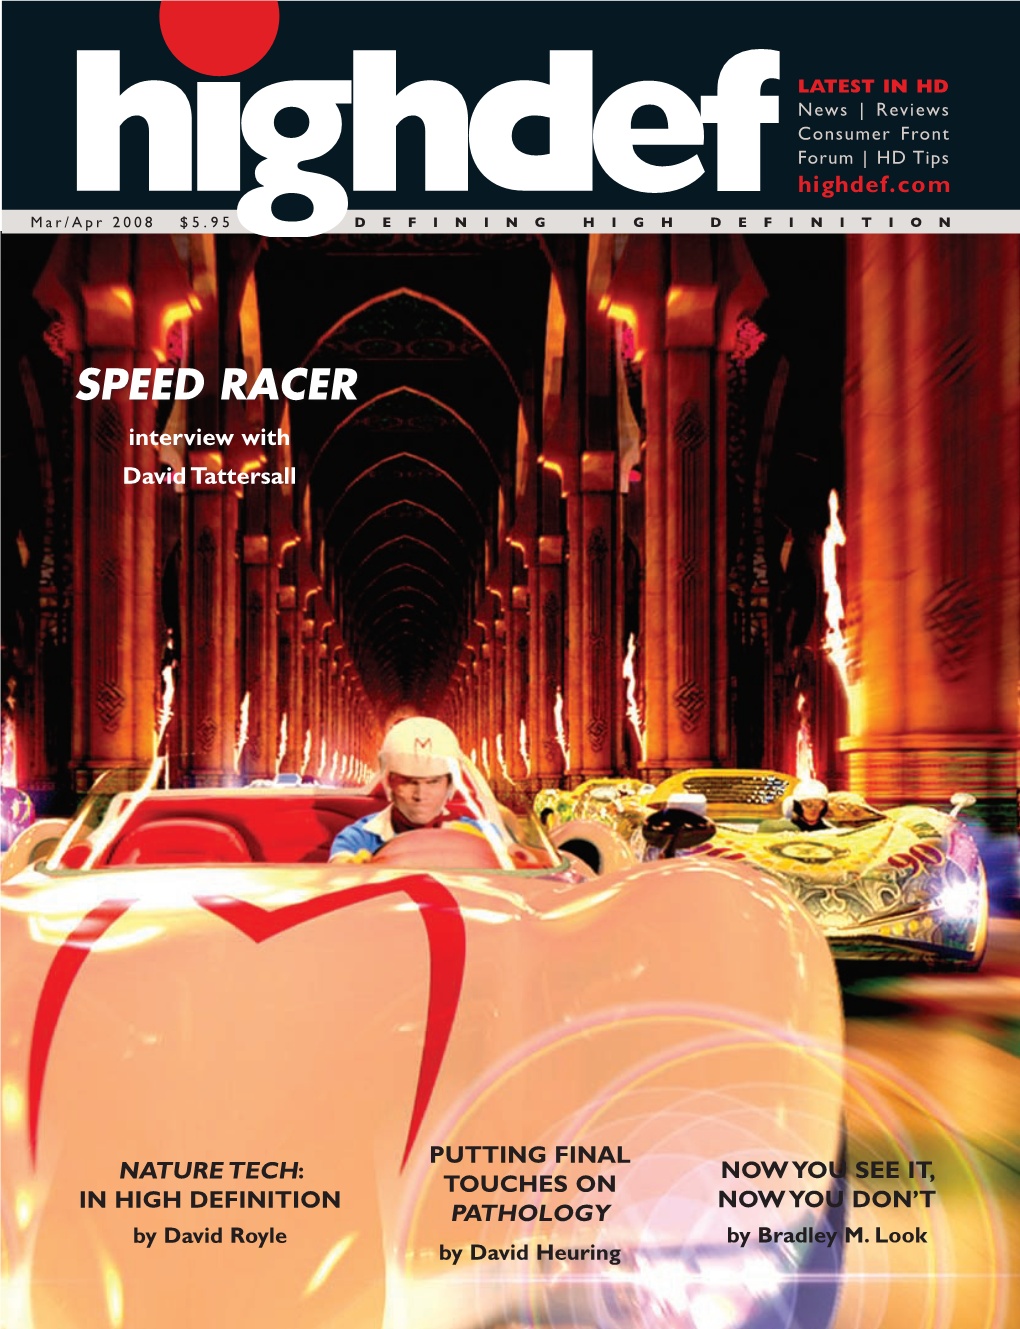 Speed Racer Interview with David Tattersall